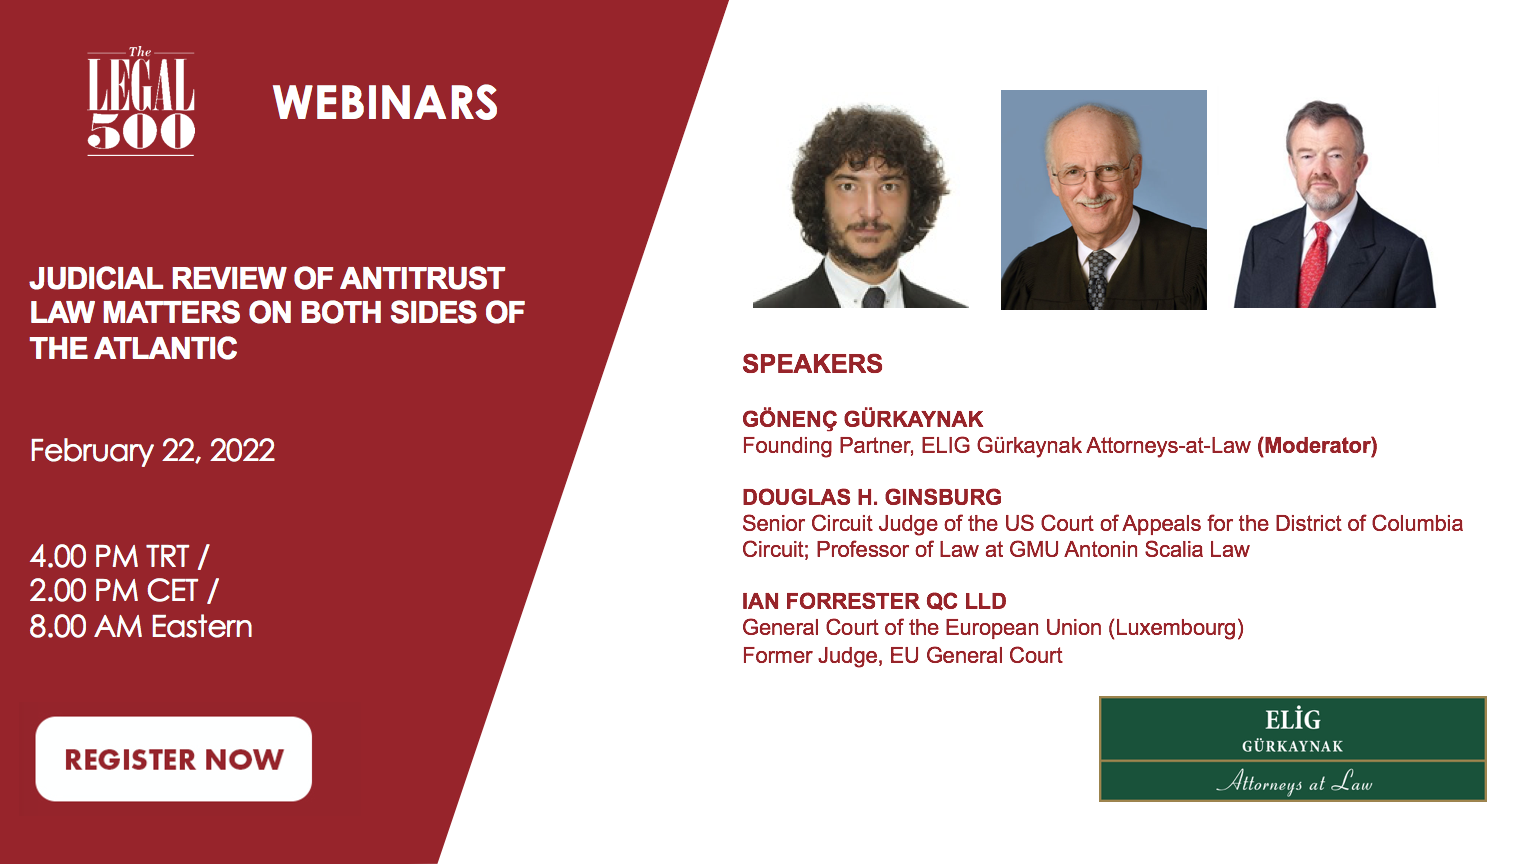 Mr. Gönenç Gürkaynak, the founding partner and head of ELIG Gürkaynak’s competition law and regulatory team, will speak at The Legal 500 webinar entitled “Judicial Review of Antitrust Law Matters At Both Sides of The Atlantic” on Tuesday, February 22, 2022 at 8:00 EST / 13:00 UK time / 14:00 CET / 16:00 Turkish time.